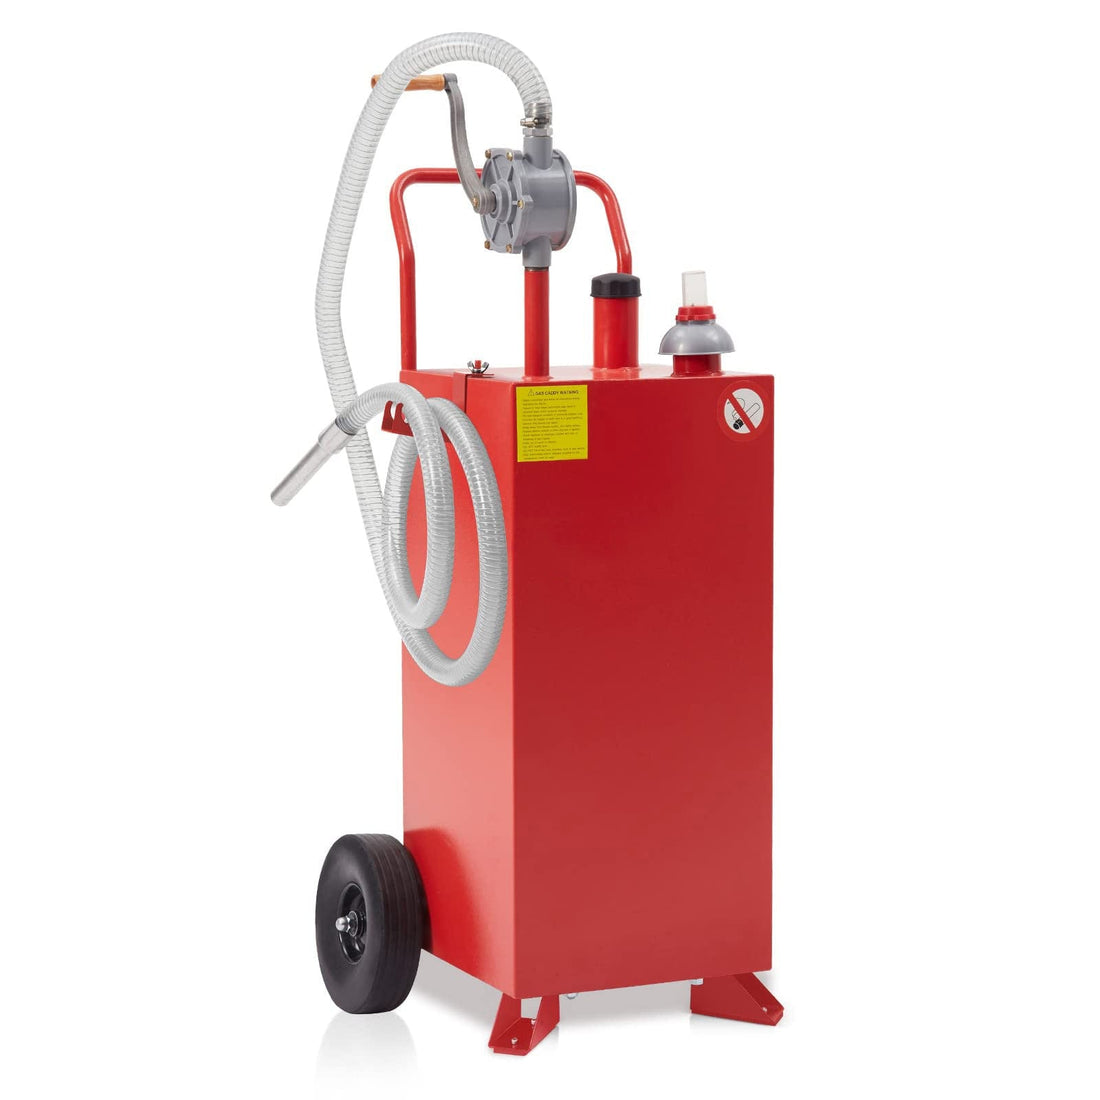 30 Gallon Gas Caddy with Pump for Gasoline & Diesel